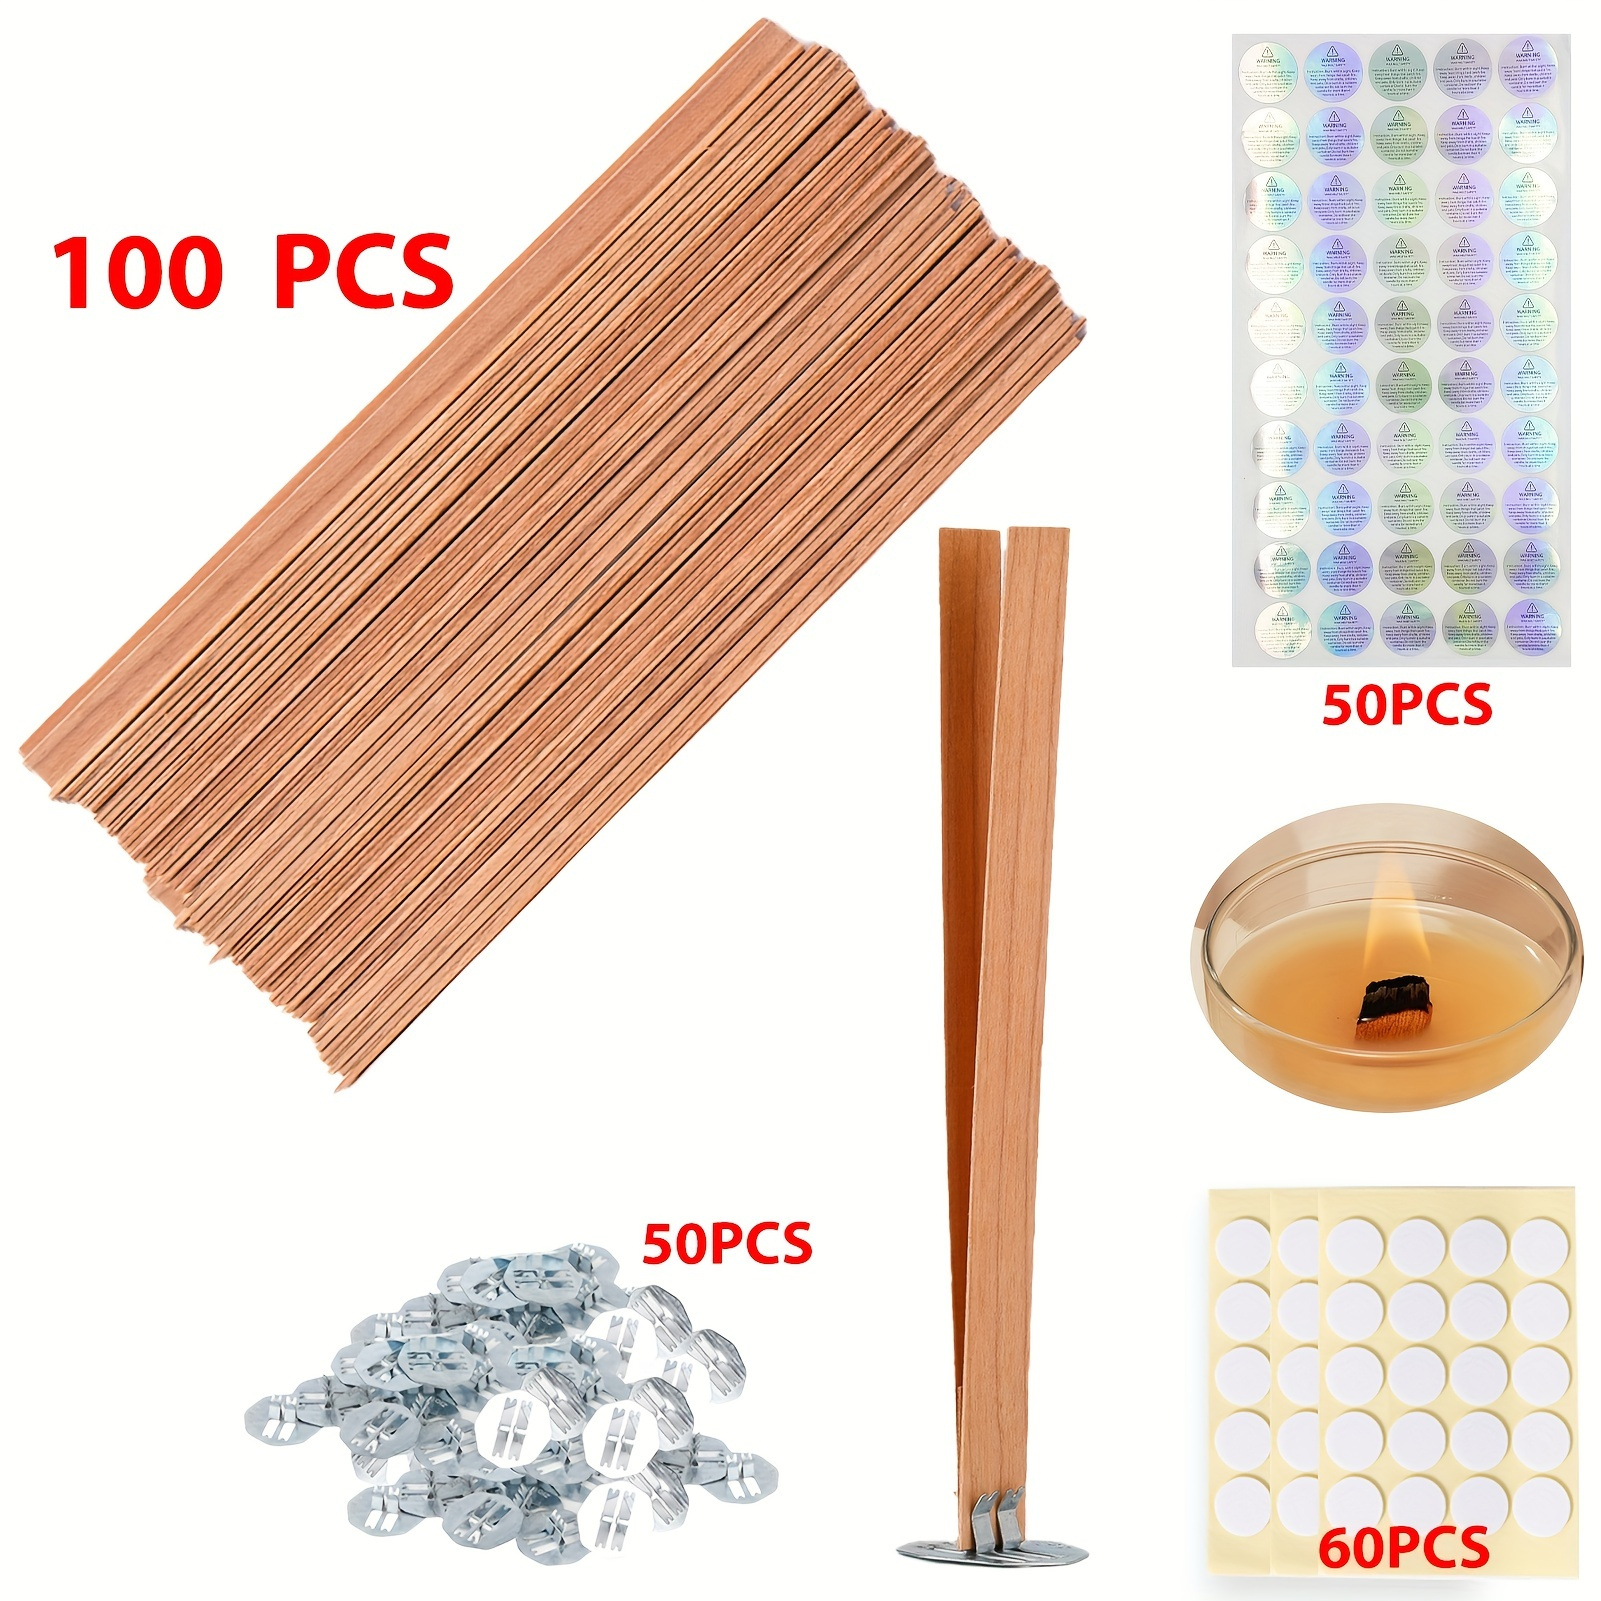 20Pcs/Pack Wood Wicks For Candles, Wood Candle Wicks Wood Wicks